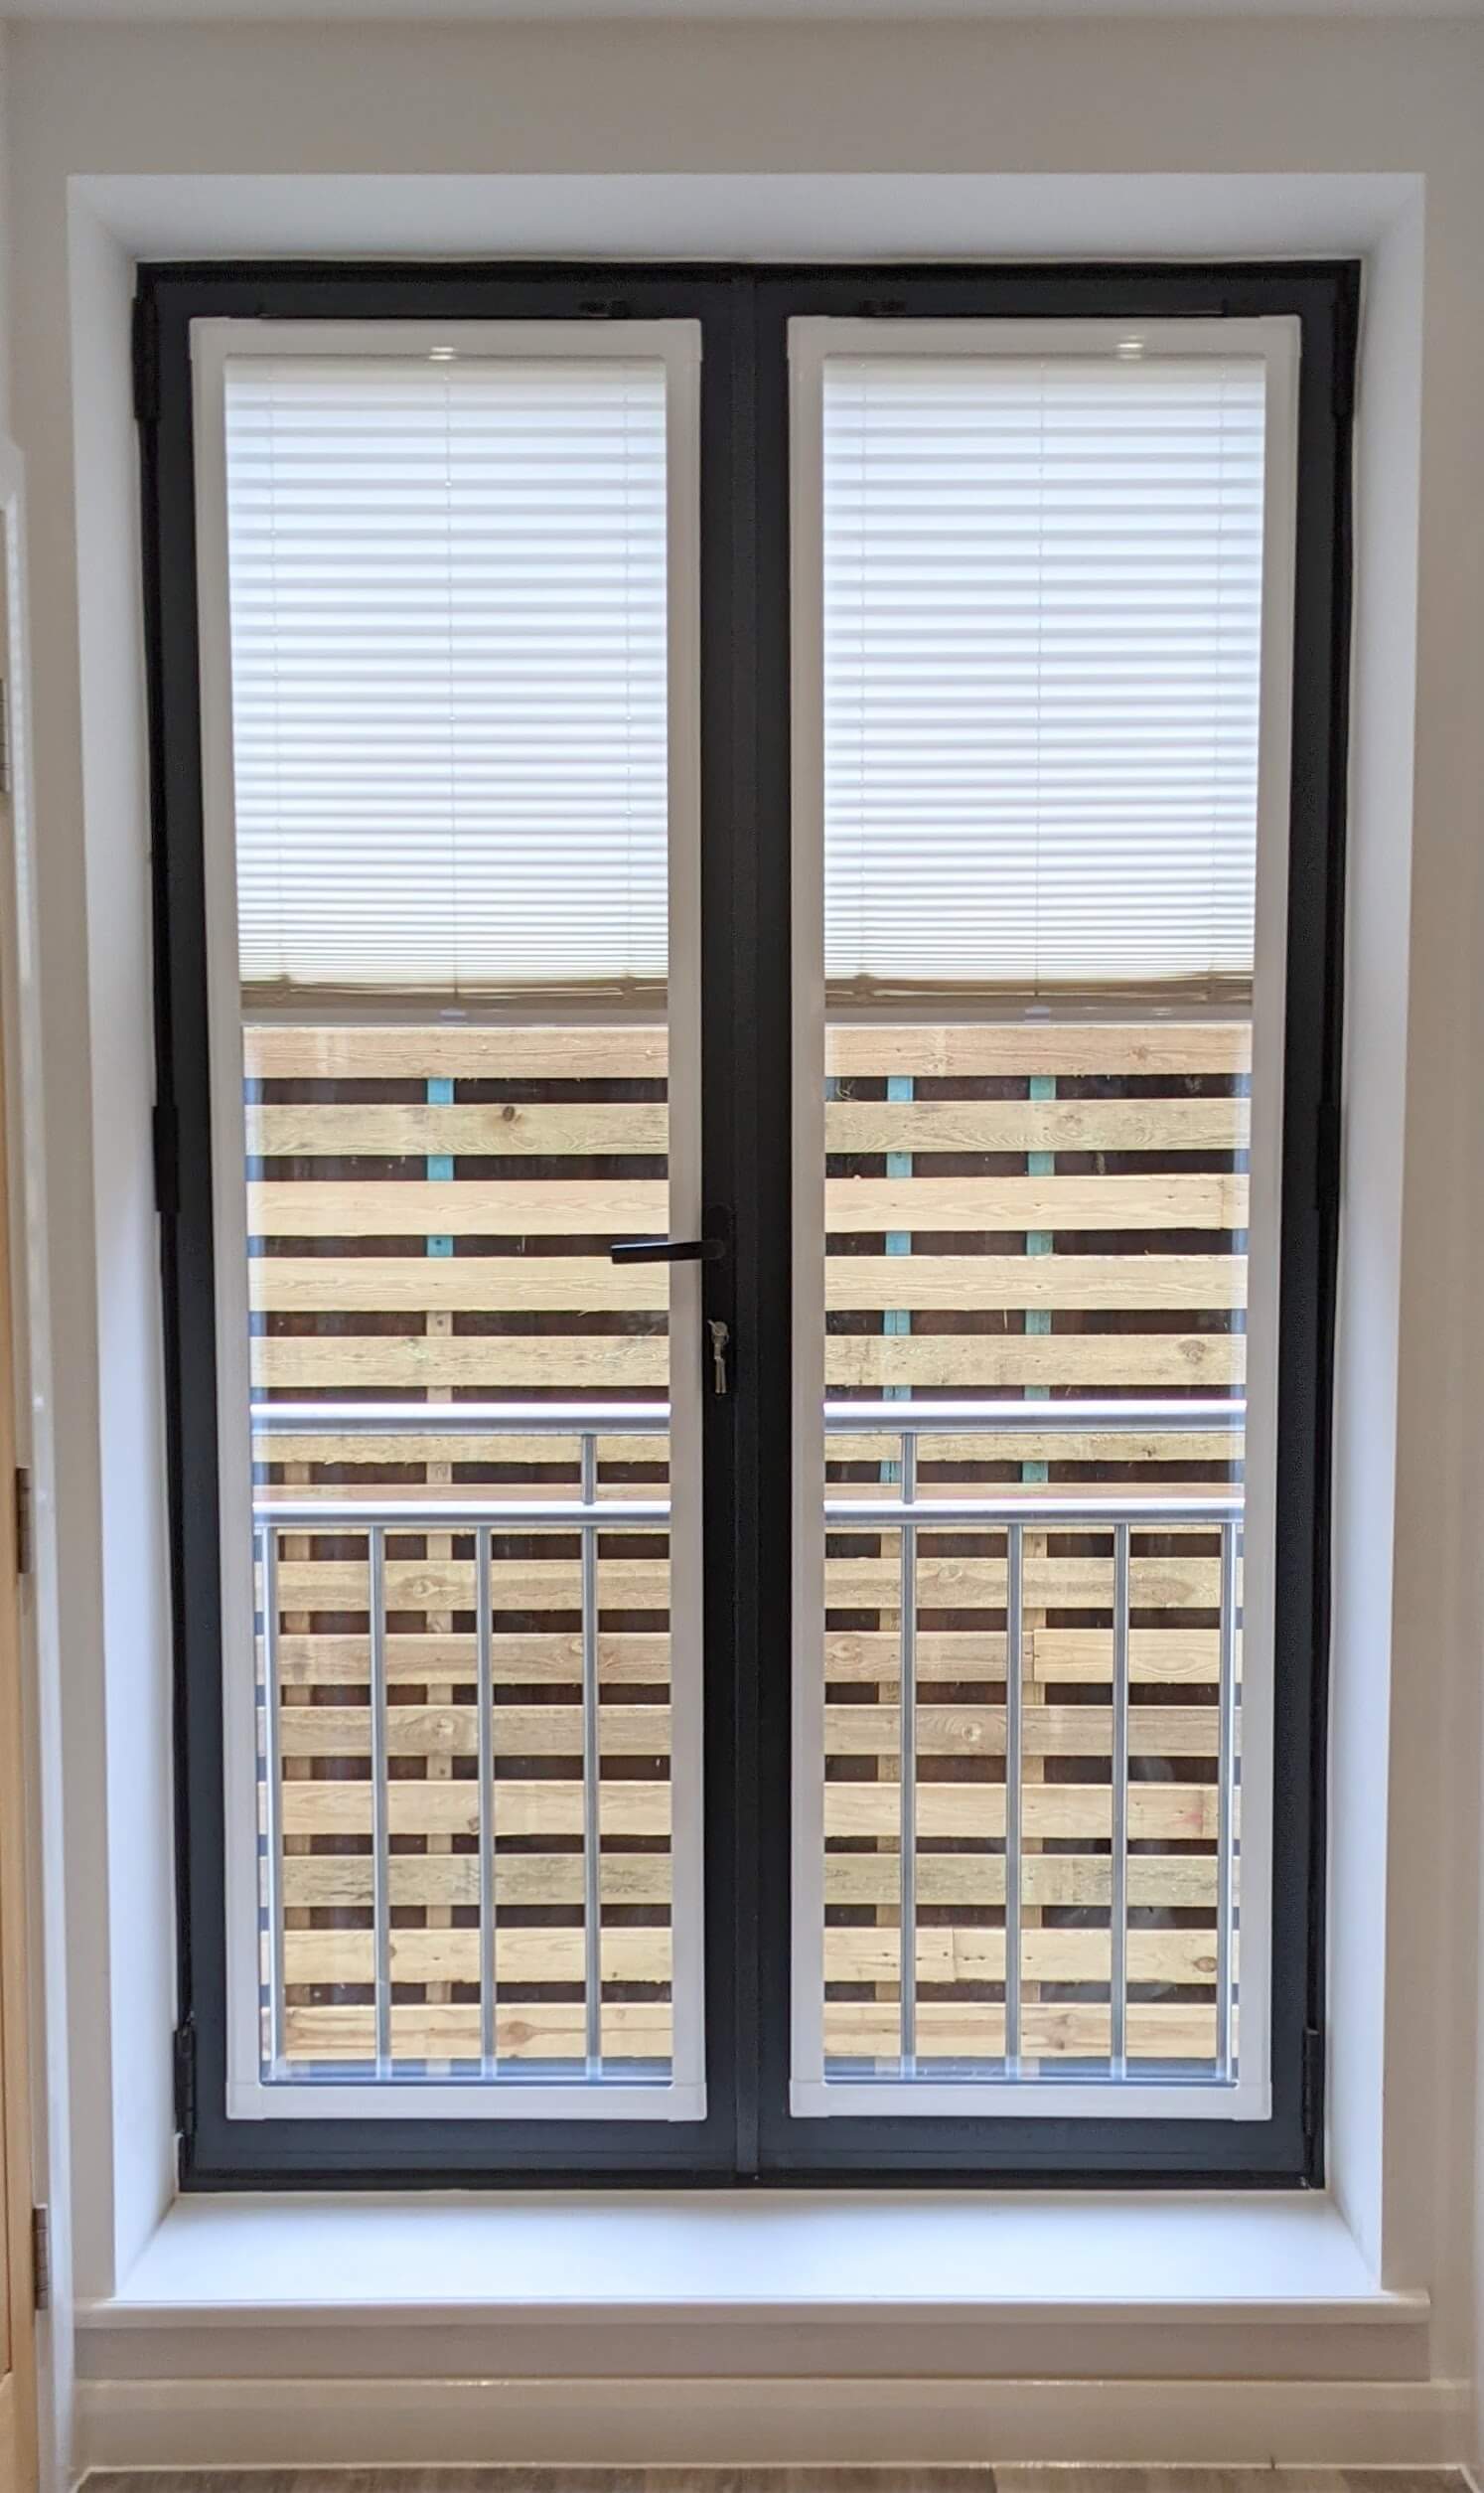 Perfect Fit Honeycomb Blind